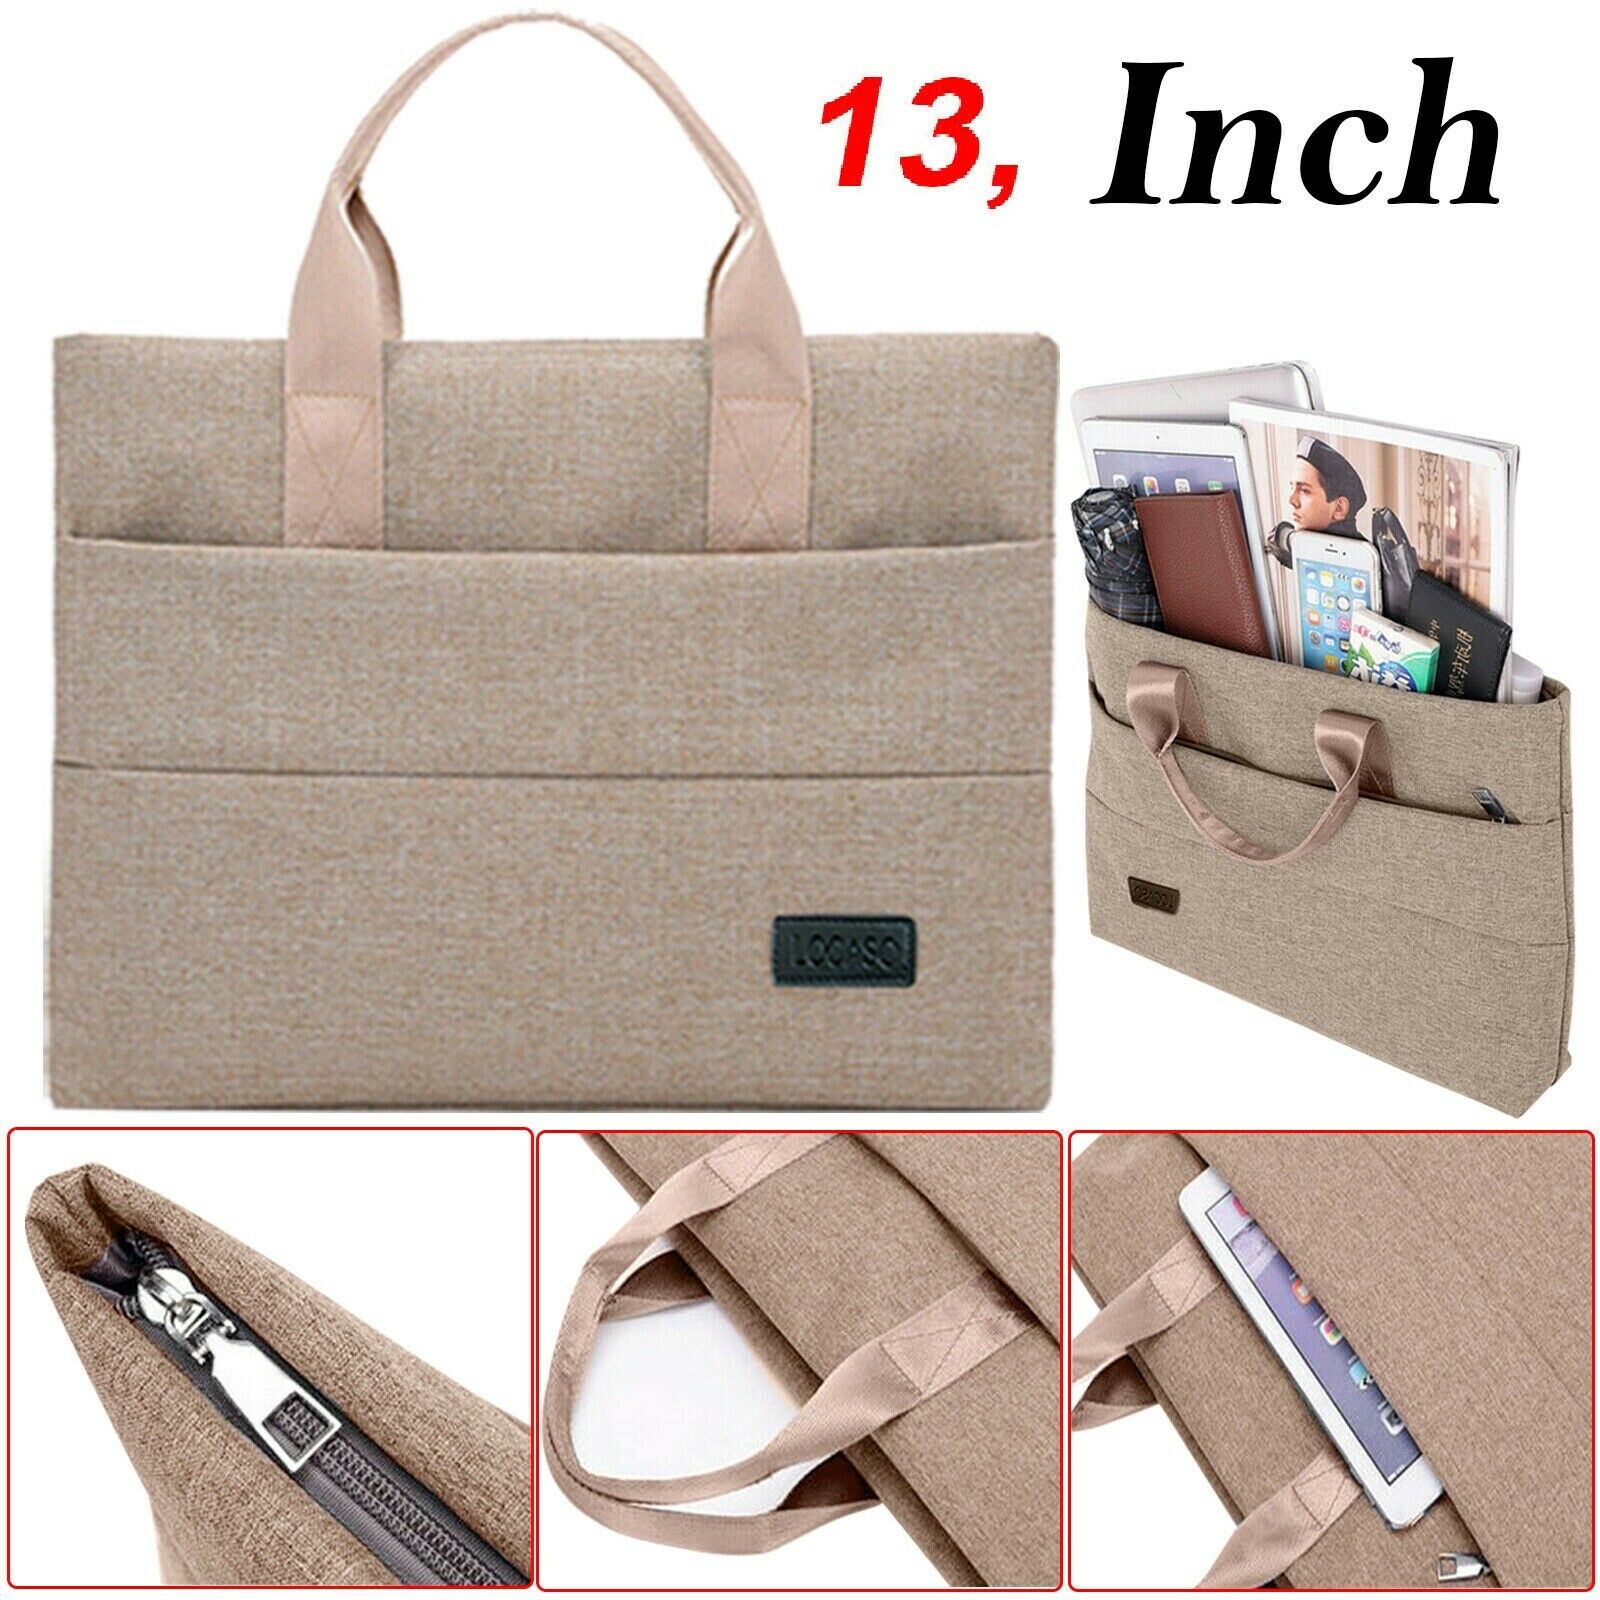 13 Inch Beige Notebook Laptop Sleeve Bag Cover Case For Apple Macbook Air Pro